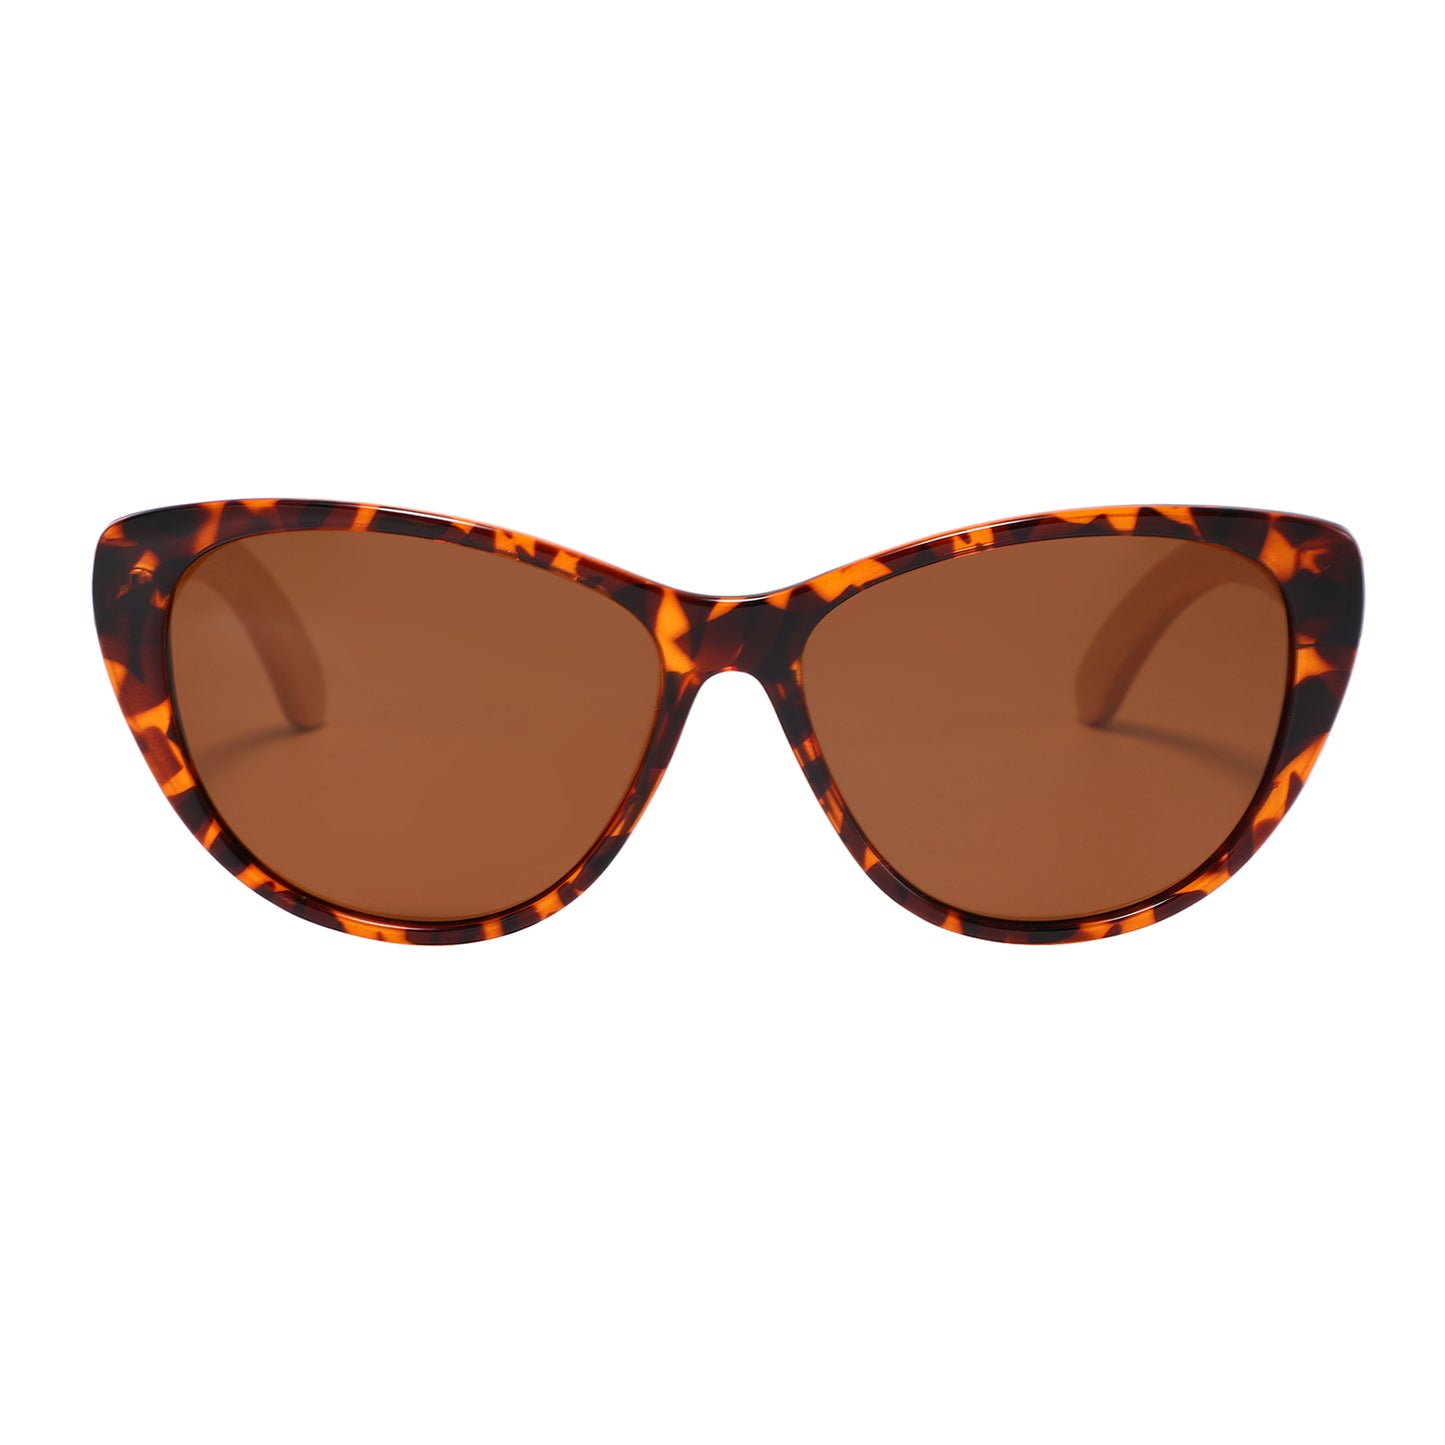 The new, oh-so-flattering Callies in oh-so-trendy brown tortoise-shell frame with polarized brown lens and bamboo wooden arms.